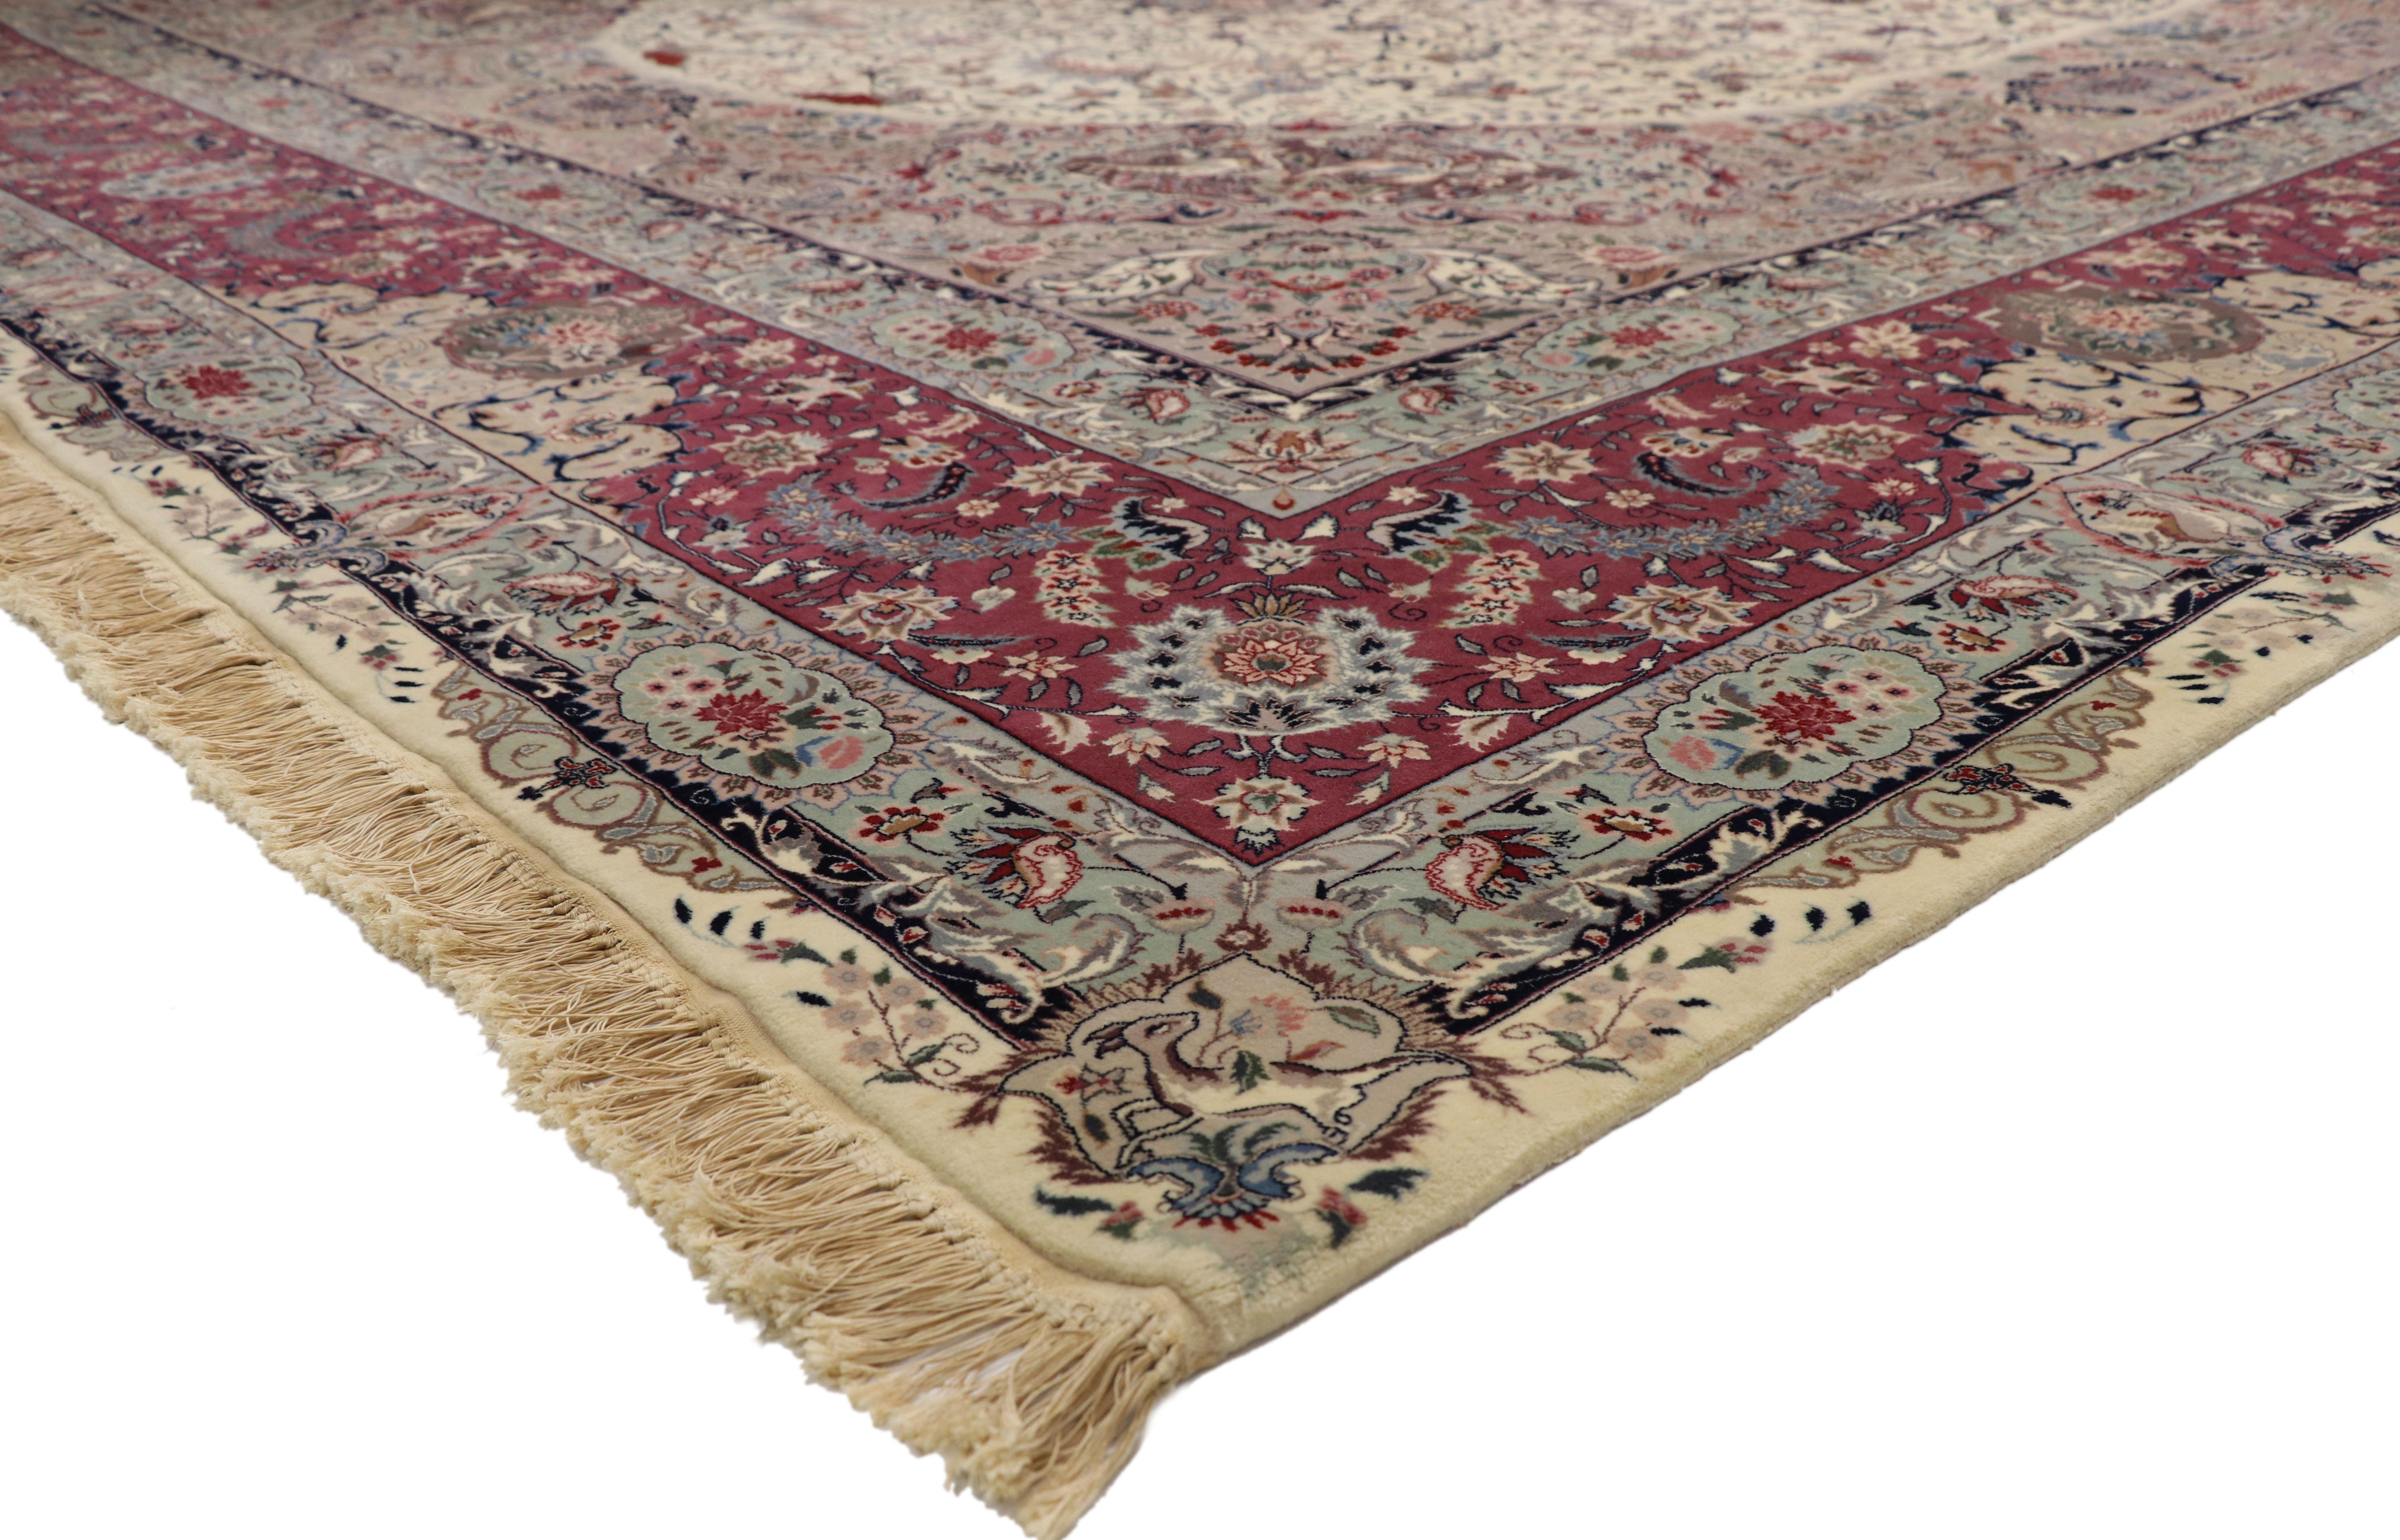 77360 Oversized Antique Persian Tabriz Rug, 11'11 x 17'08. 
Bridgerton style meets Rococo and French Romanticism in this oversized antique Persian Tabriz rug. The high decorative design and dreamy color palette woven into this piece work together